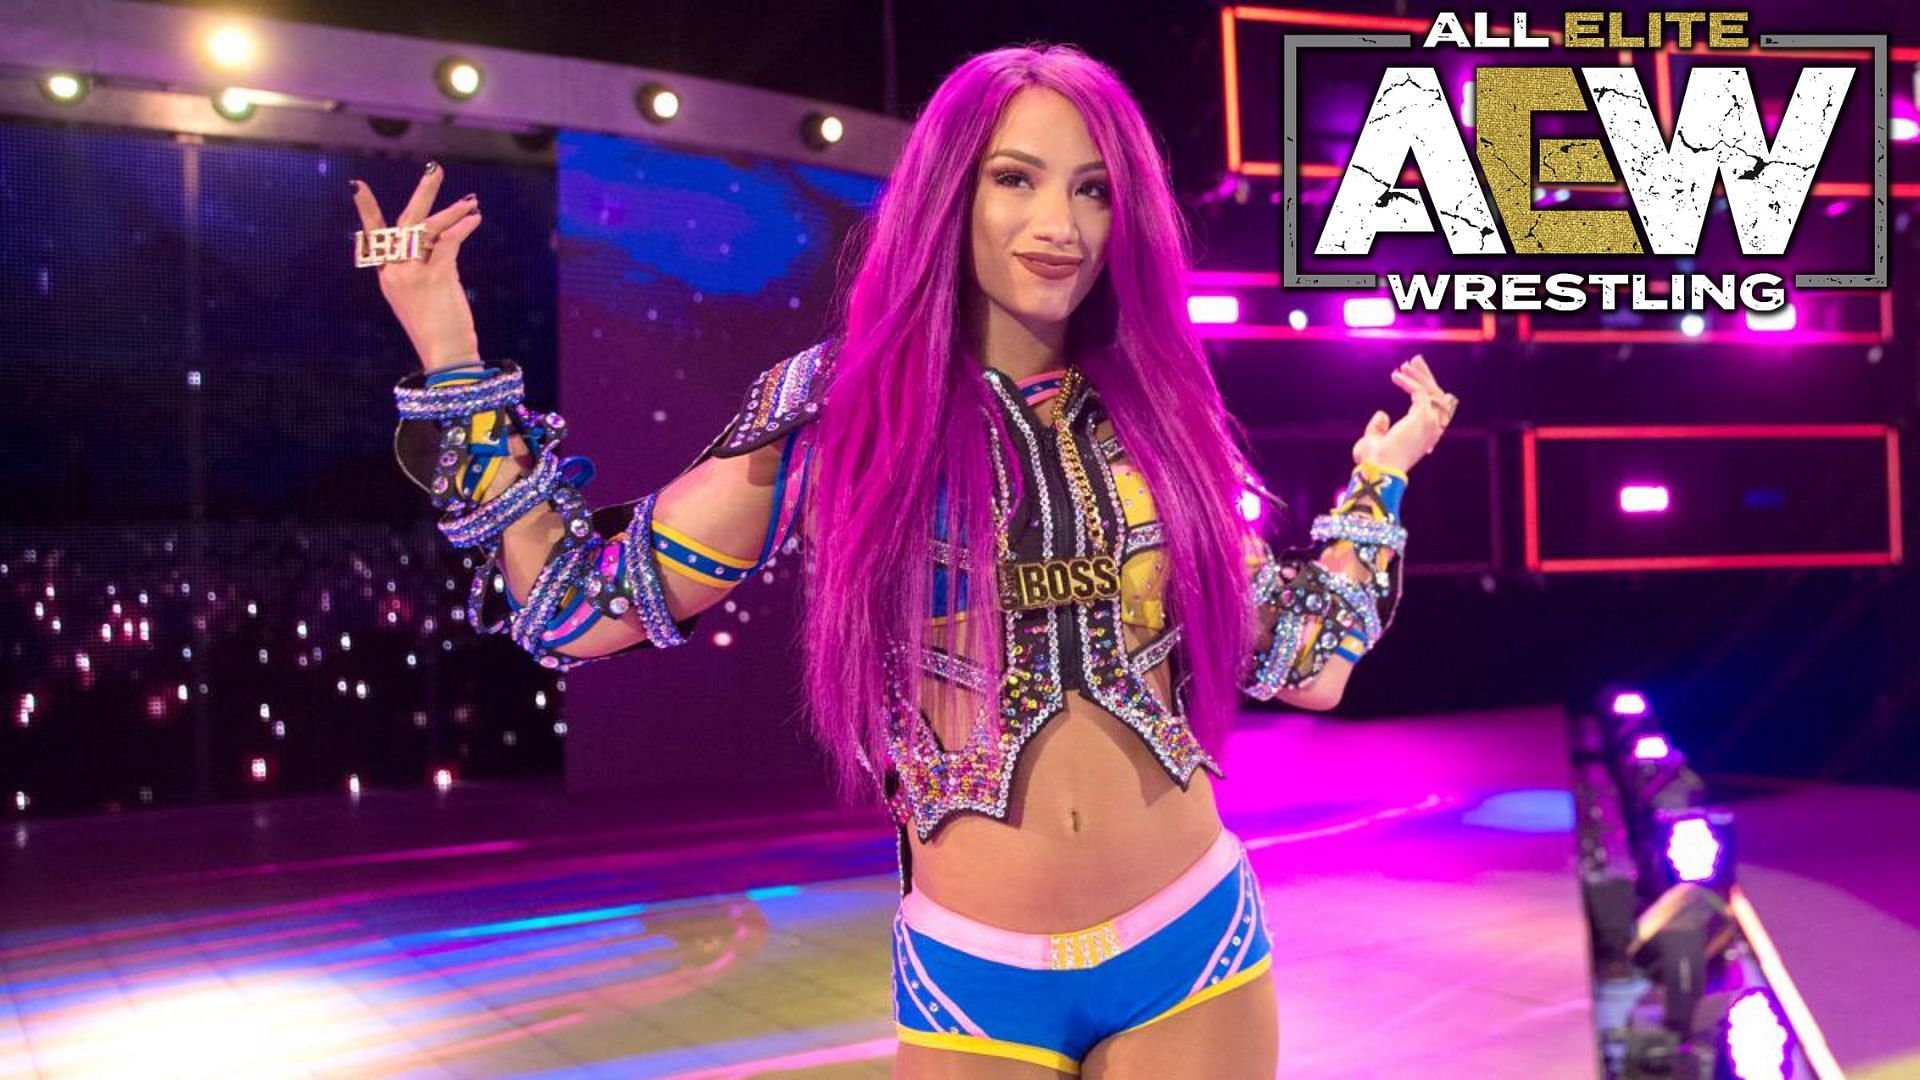 Could Mercedes Varnado be on her way to AEW?